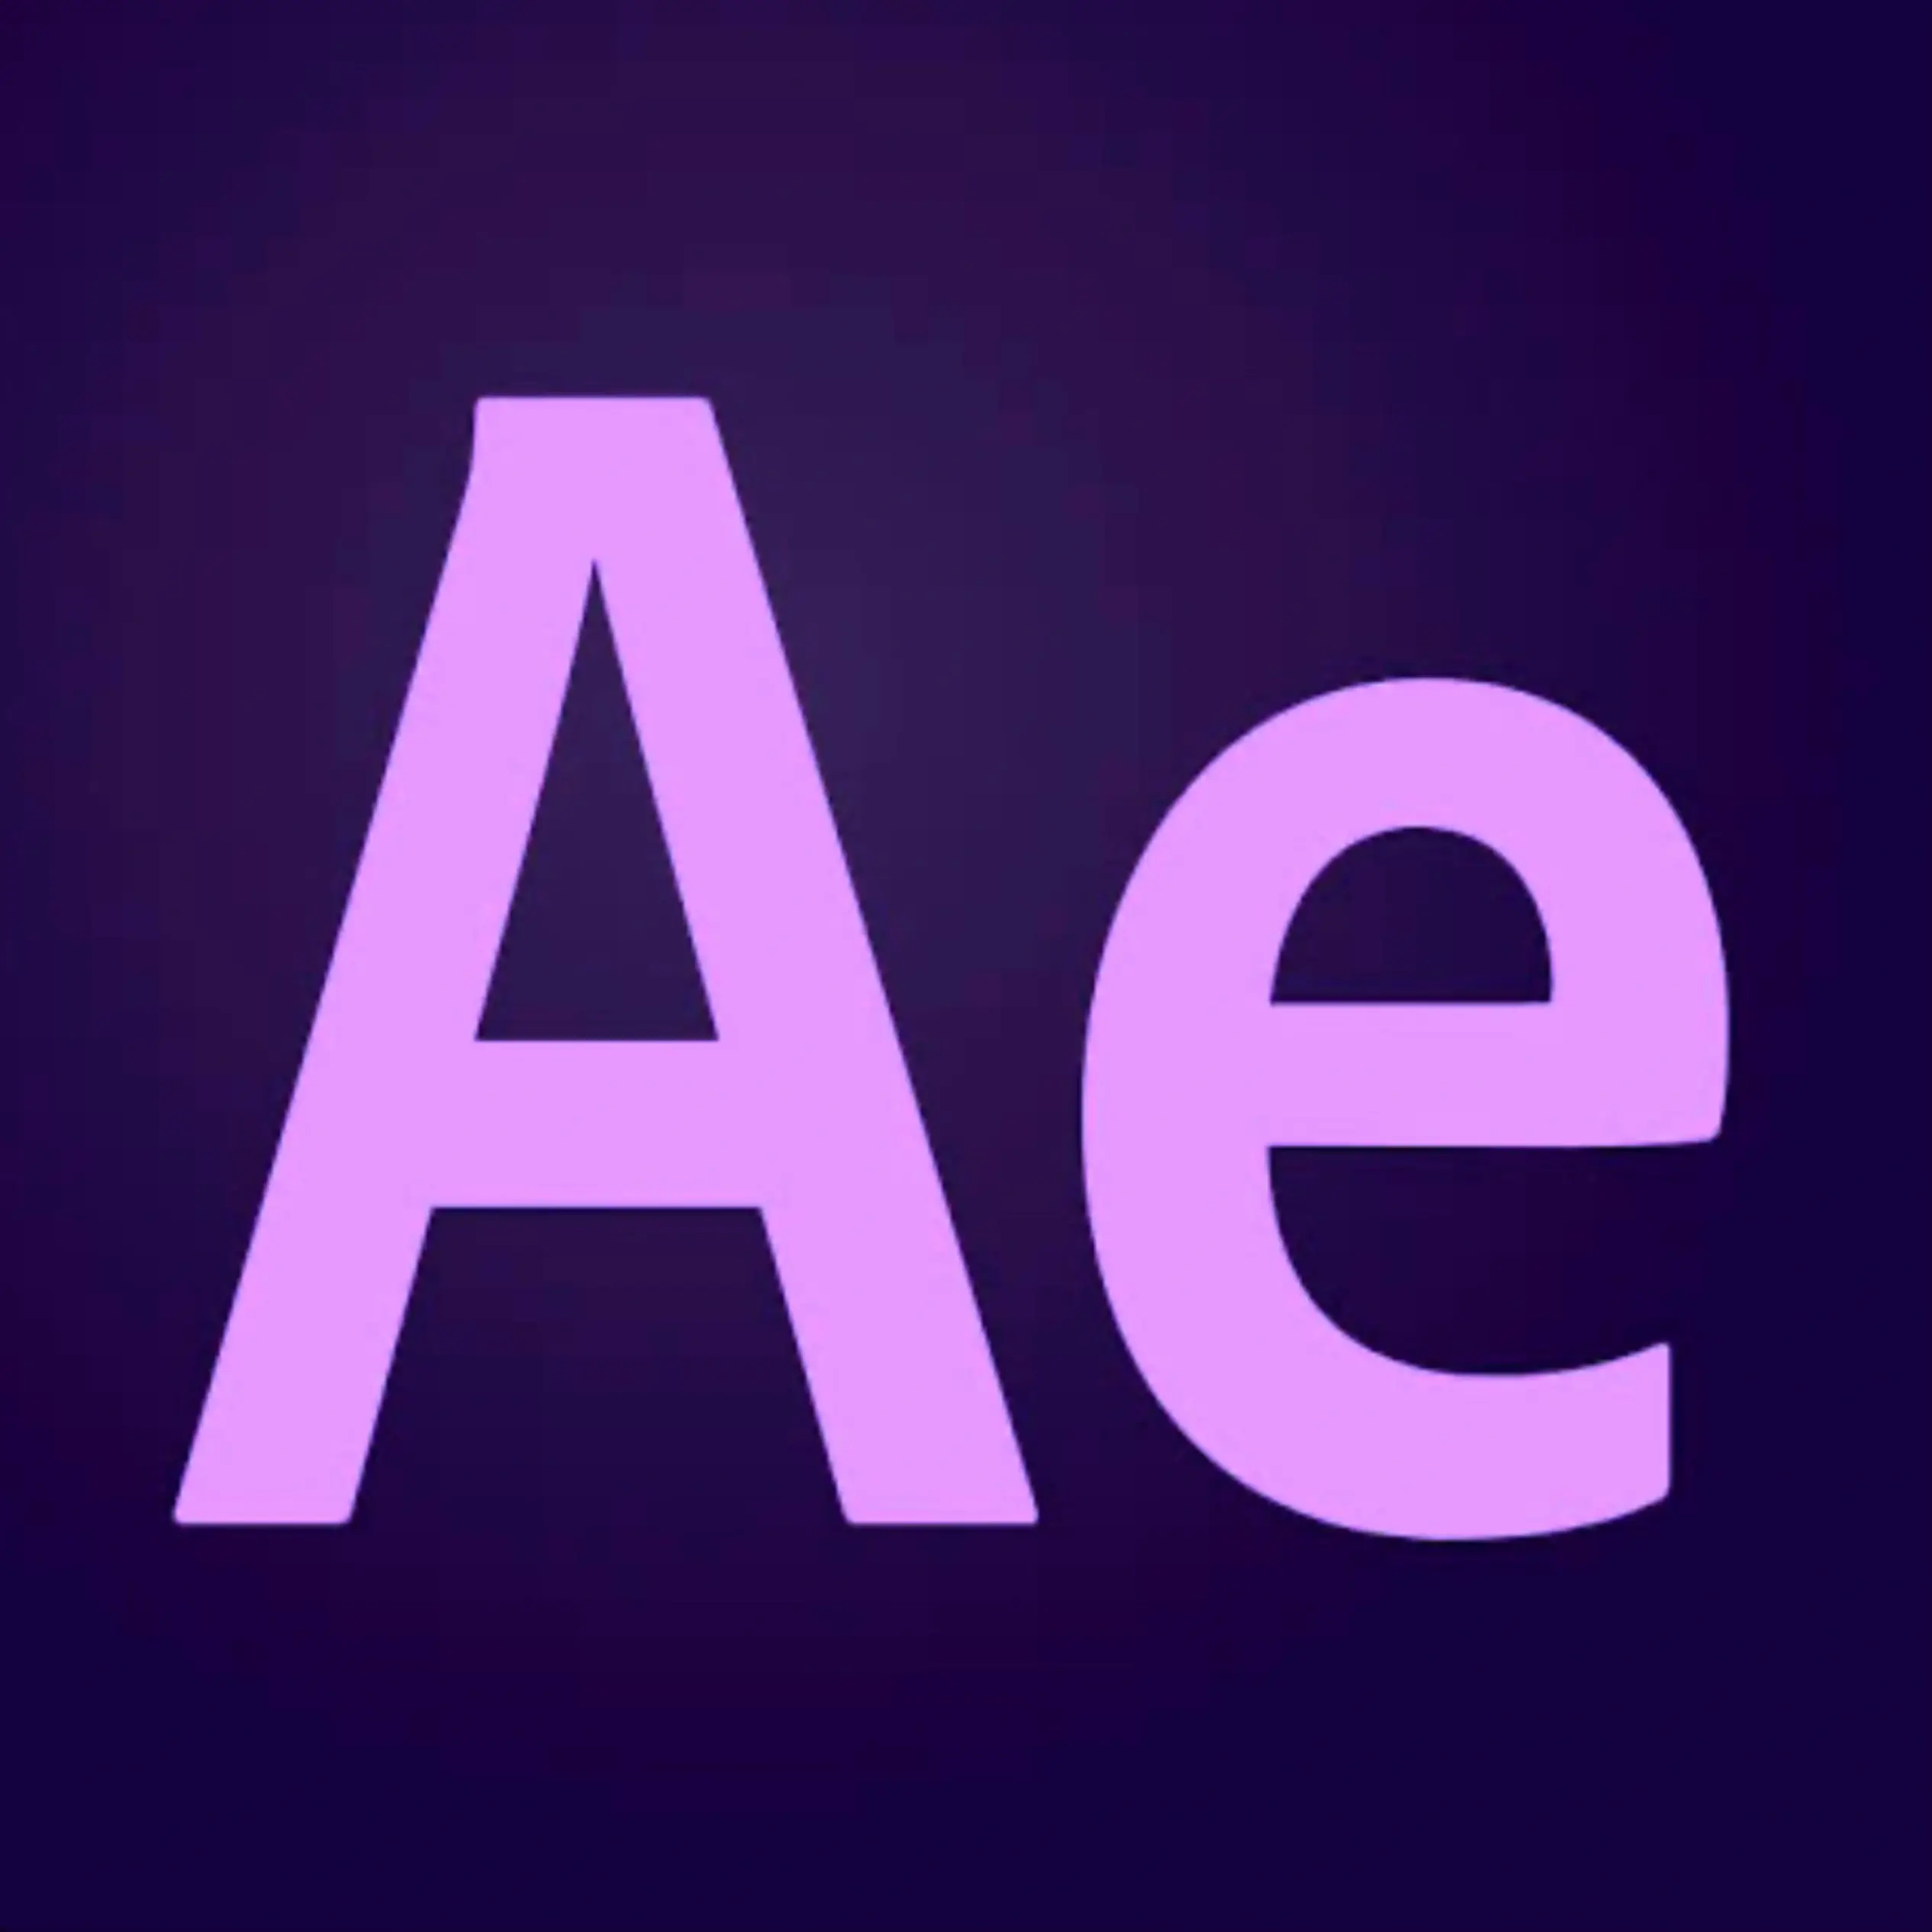 Adobe After Effects-logo